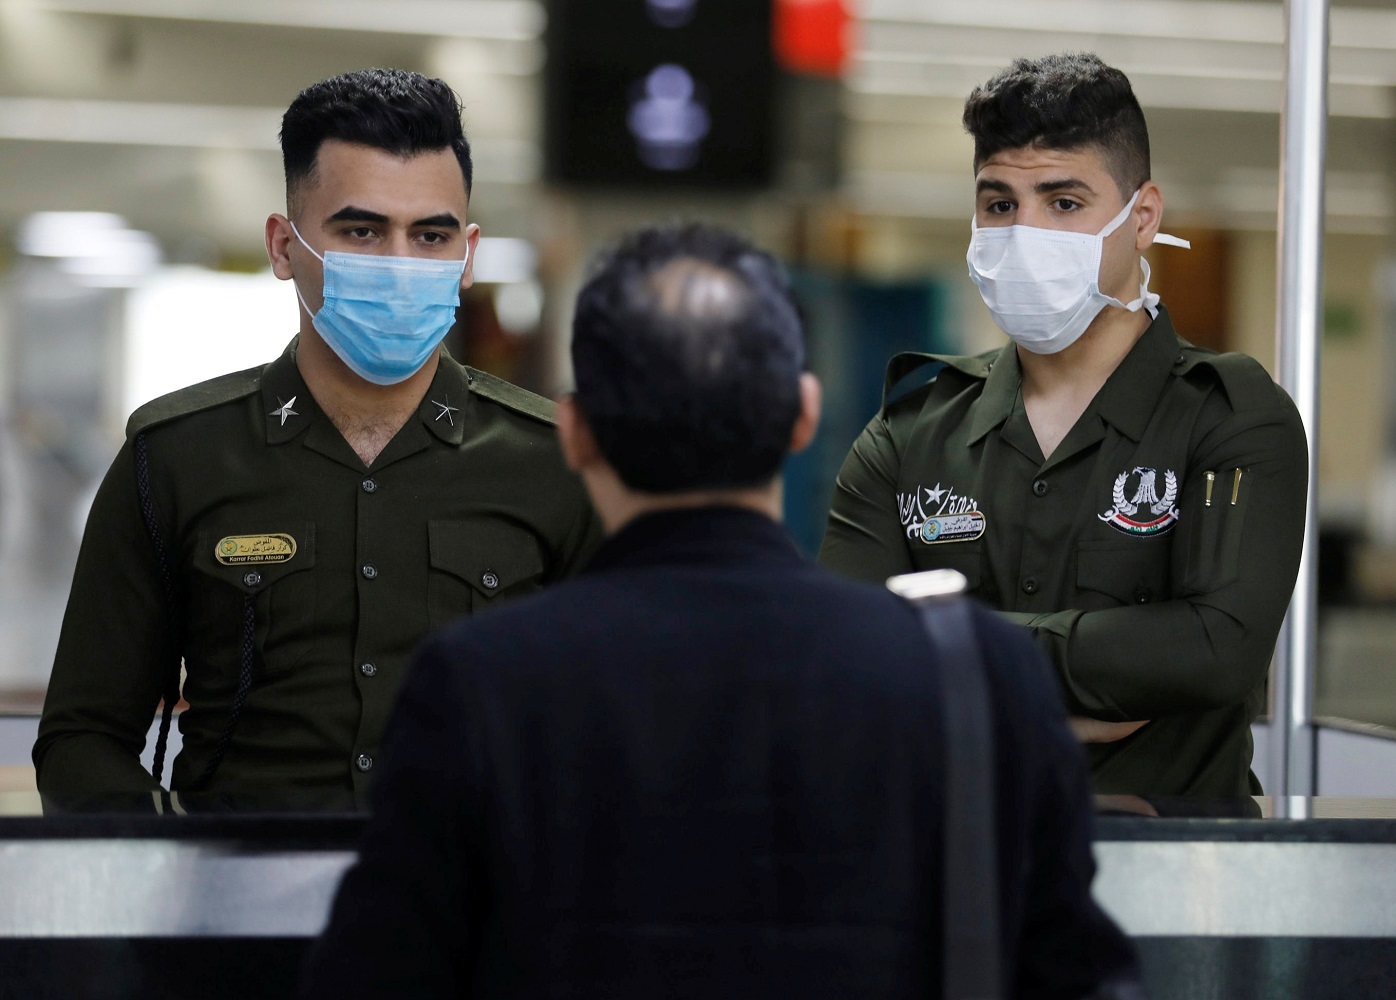 Iraqi police officers wearing protective face masks check a passenger&#039;s passport upon his arrival, following an outbreak of coronavirus, at Baghdad international Airport, in Baghdad, Iraq March 4, 2020. REUTERS/Khalid al-Mousily